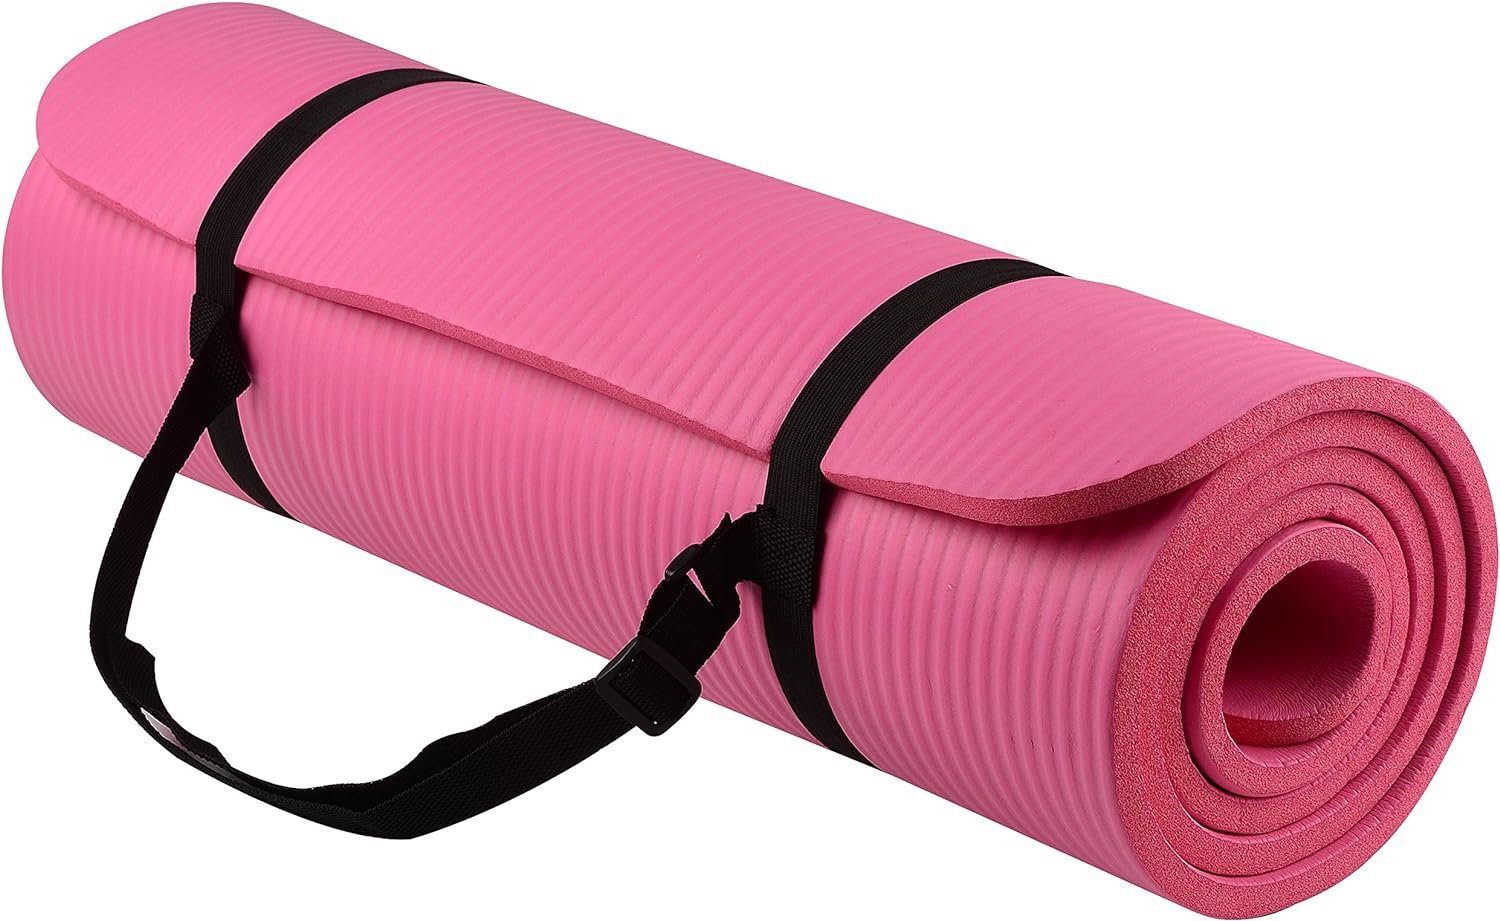 Extra Thick Yoga Mat Review